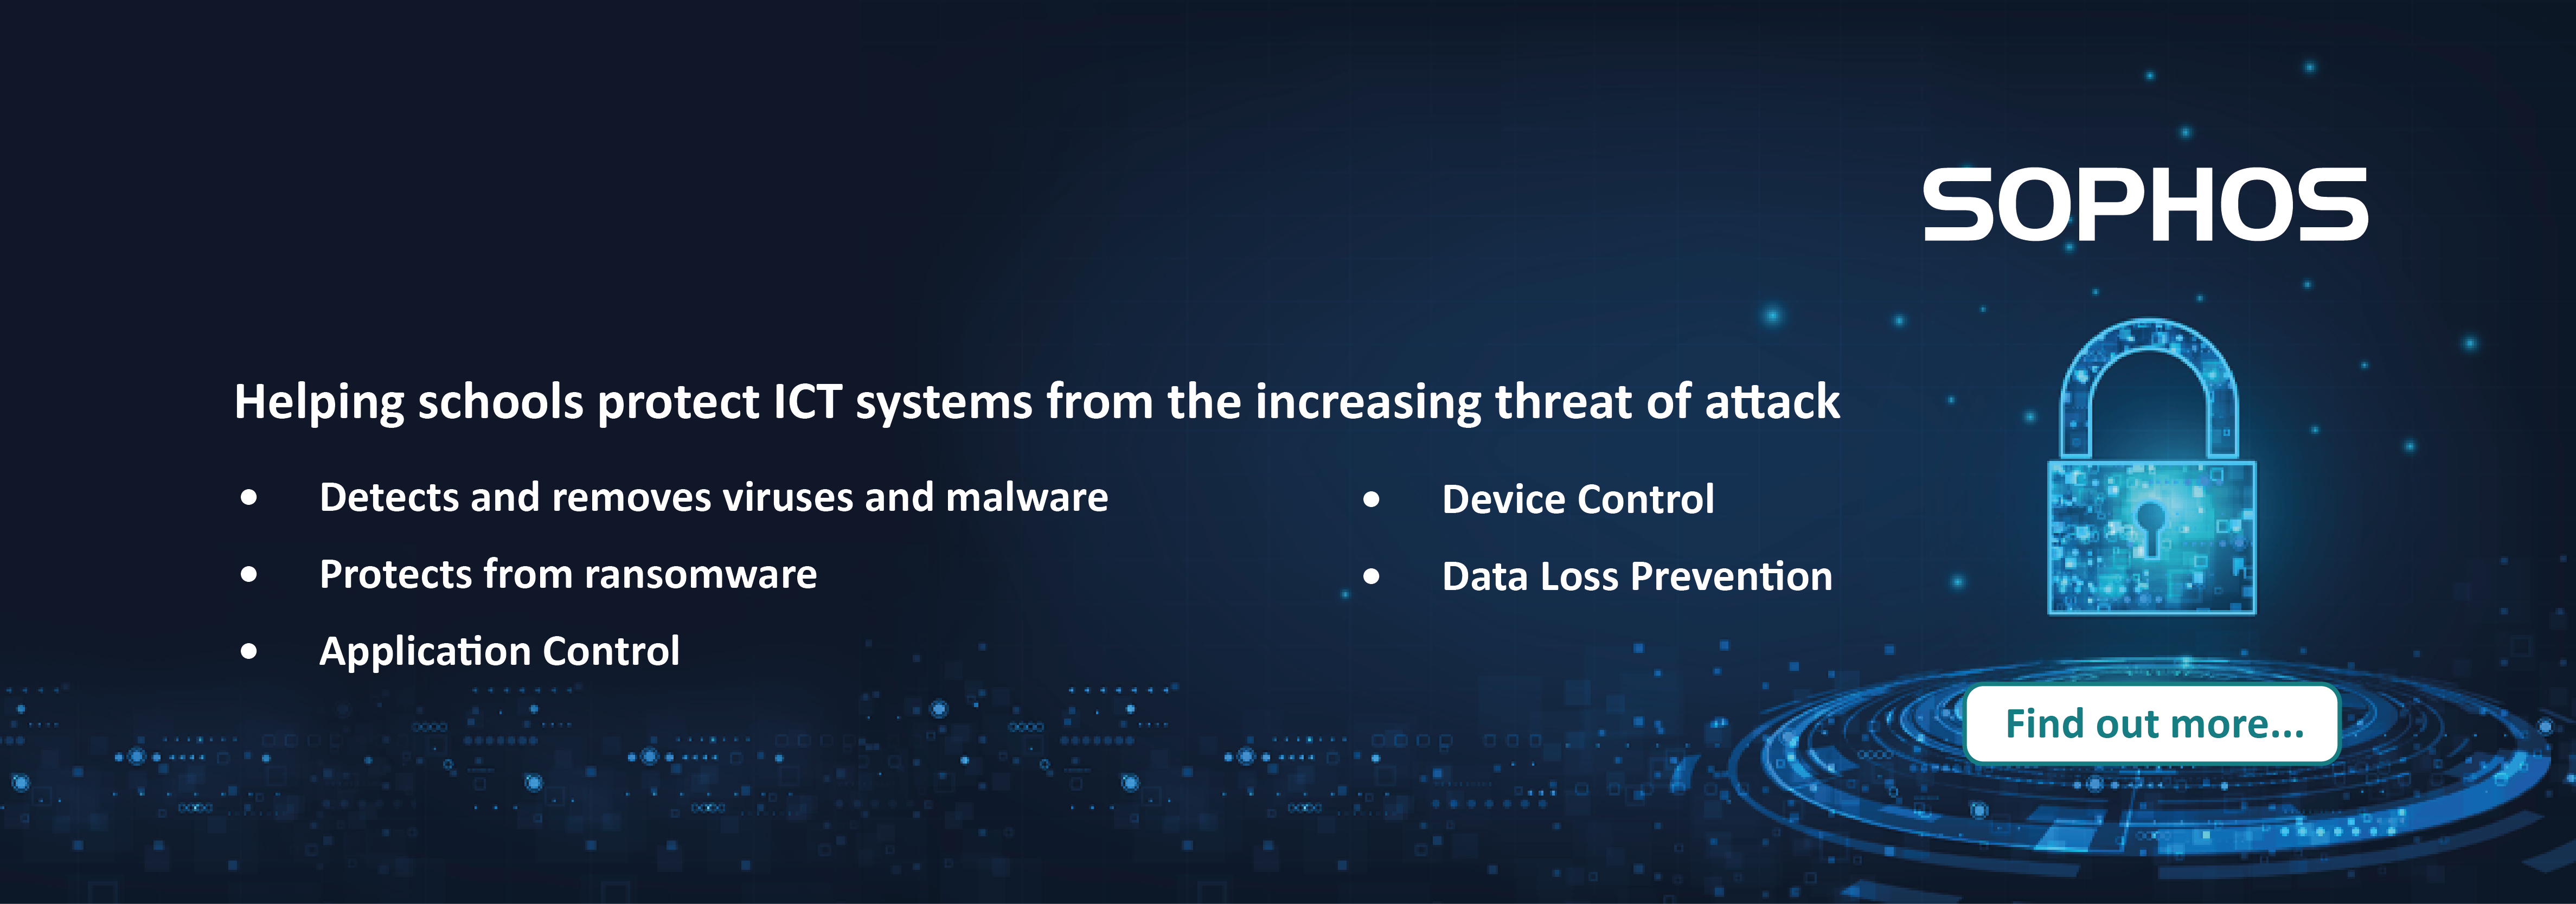 Sophos Central - Anti-Virus and Threat Protection Product